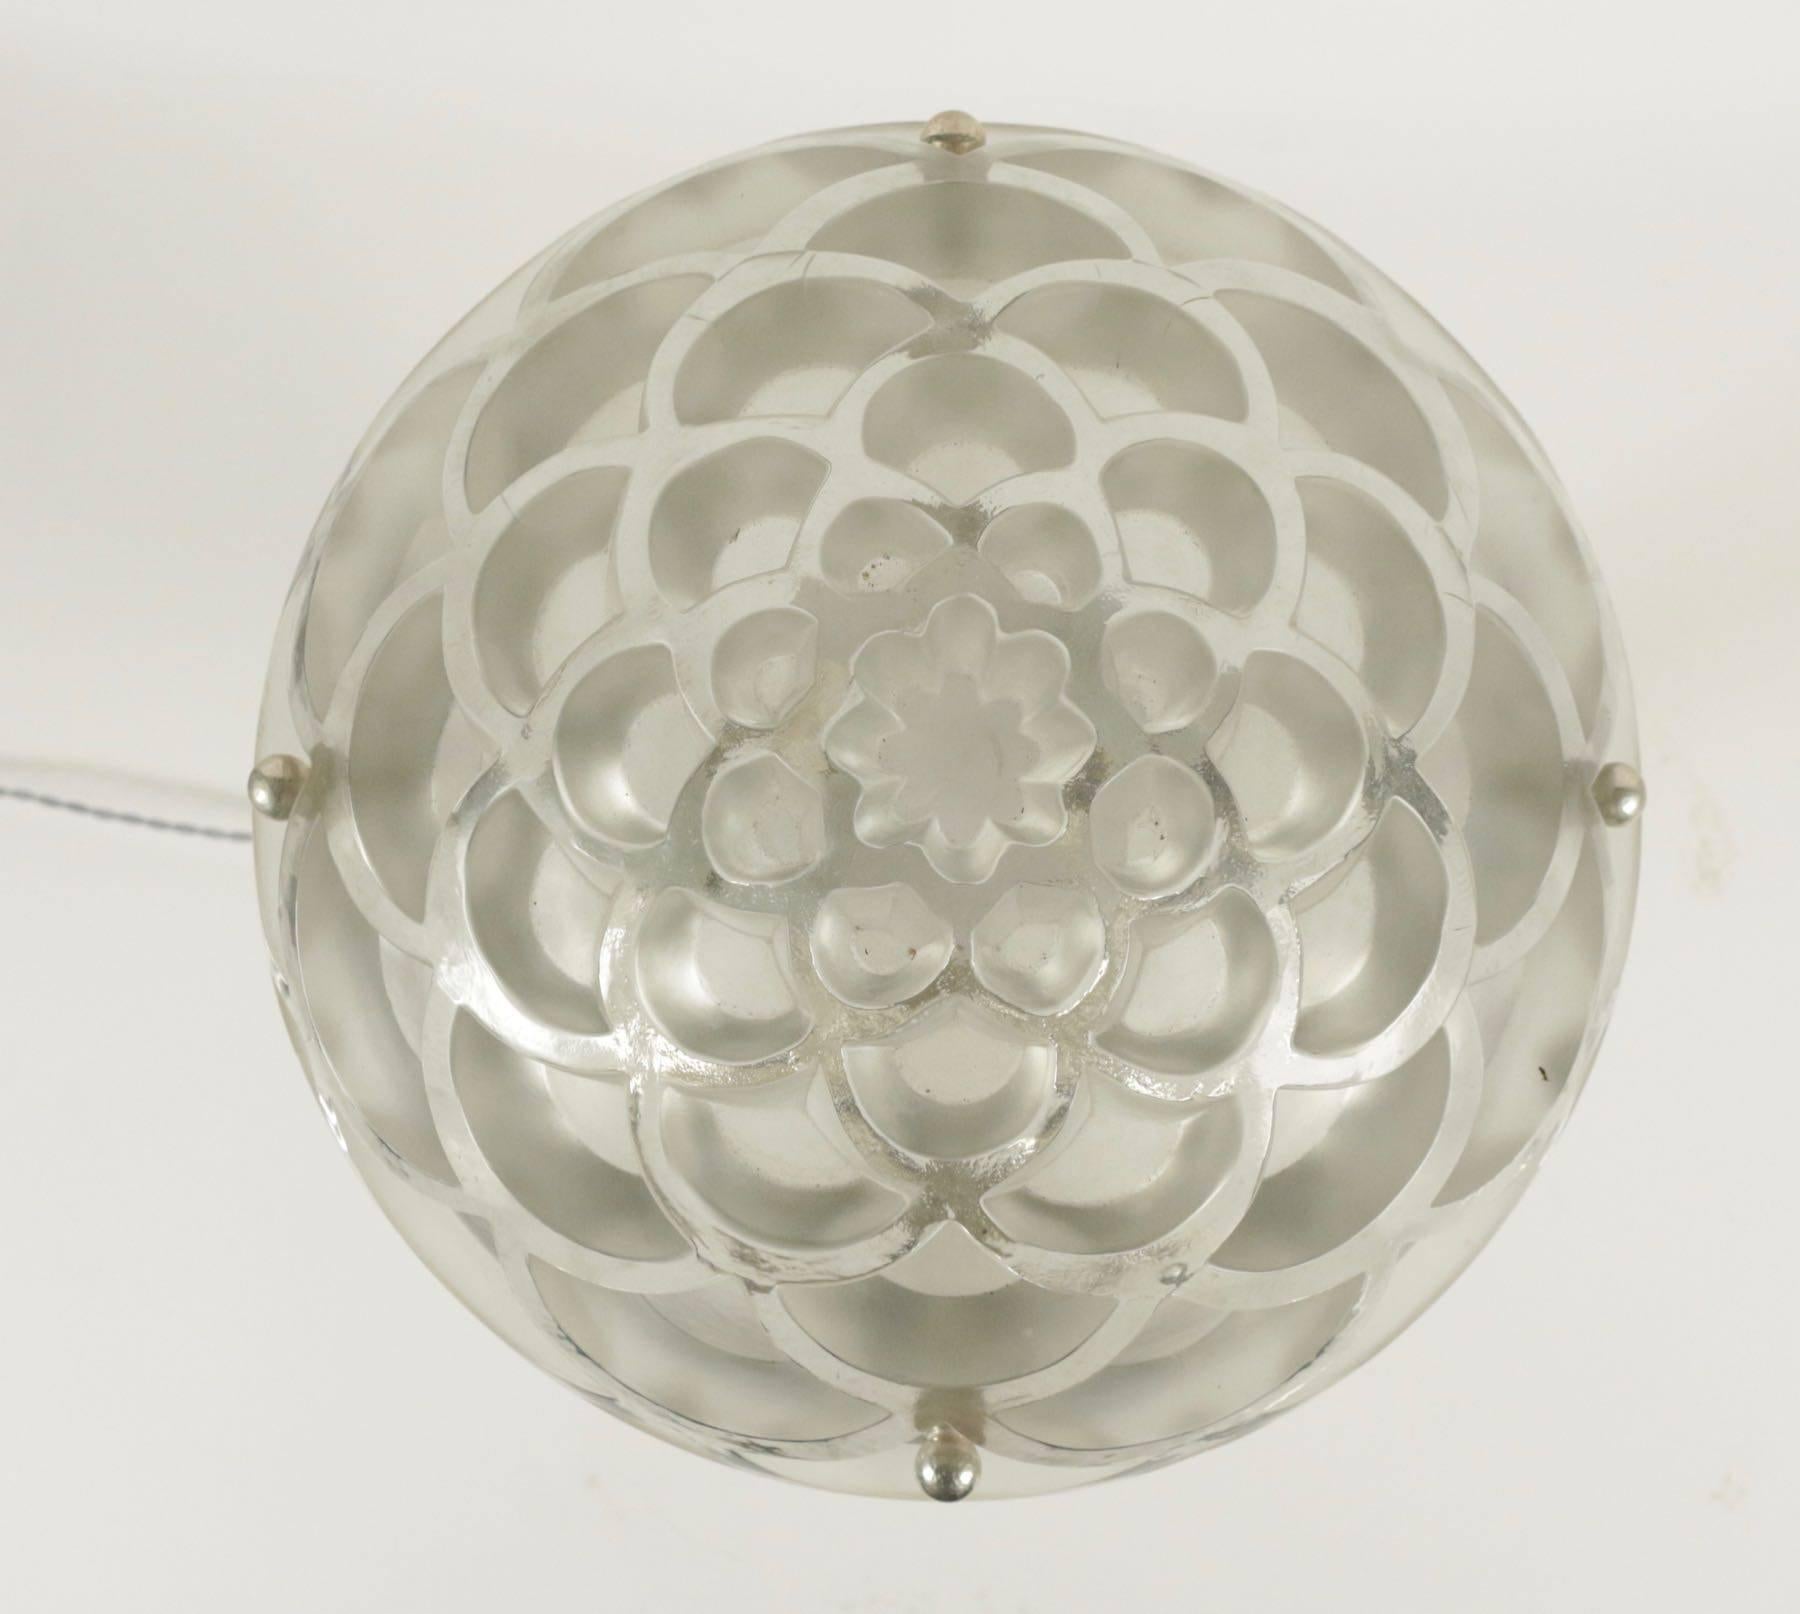 Rinceaux plafonnier
Designed 1926, clear and frosted with suspension cords and moulded glass ceiling rose wheel-engraved R. LALIQUE FRANCE 38 cm. diameter

Glass cup a satiny moulded-pressed glass bowl model created in 1926. Signed 